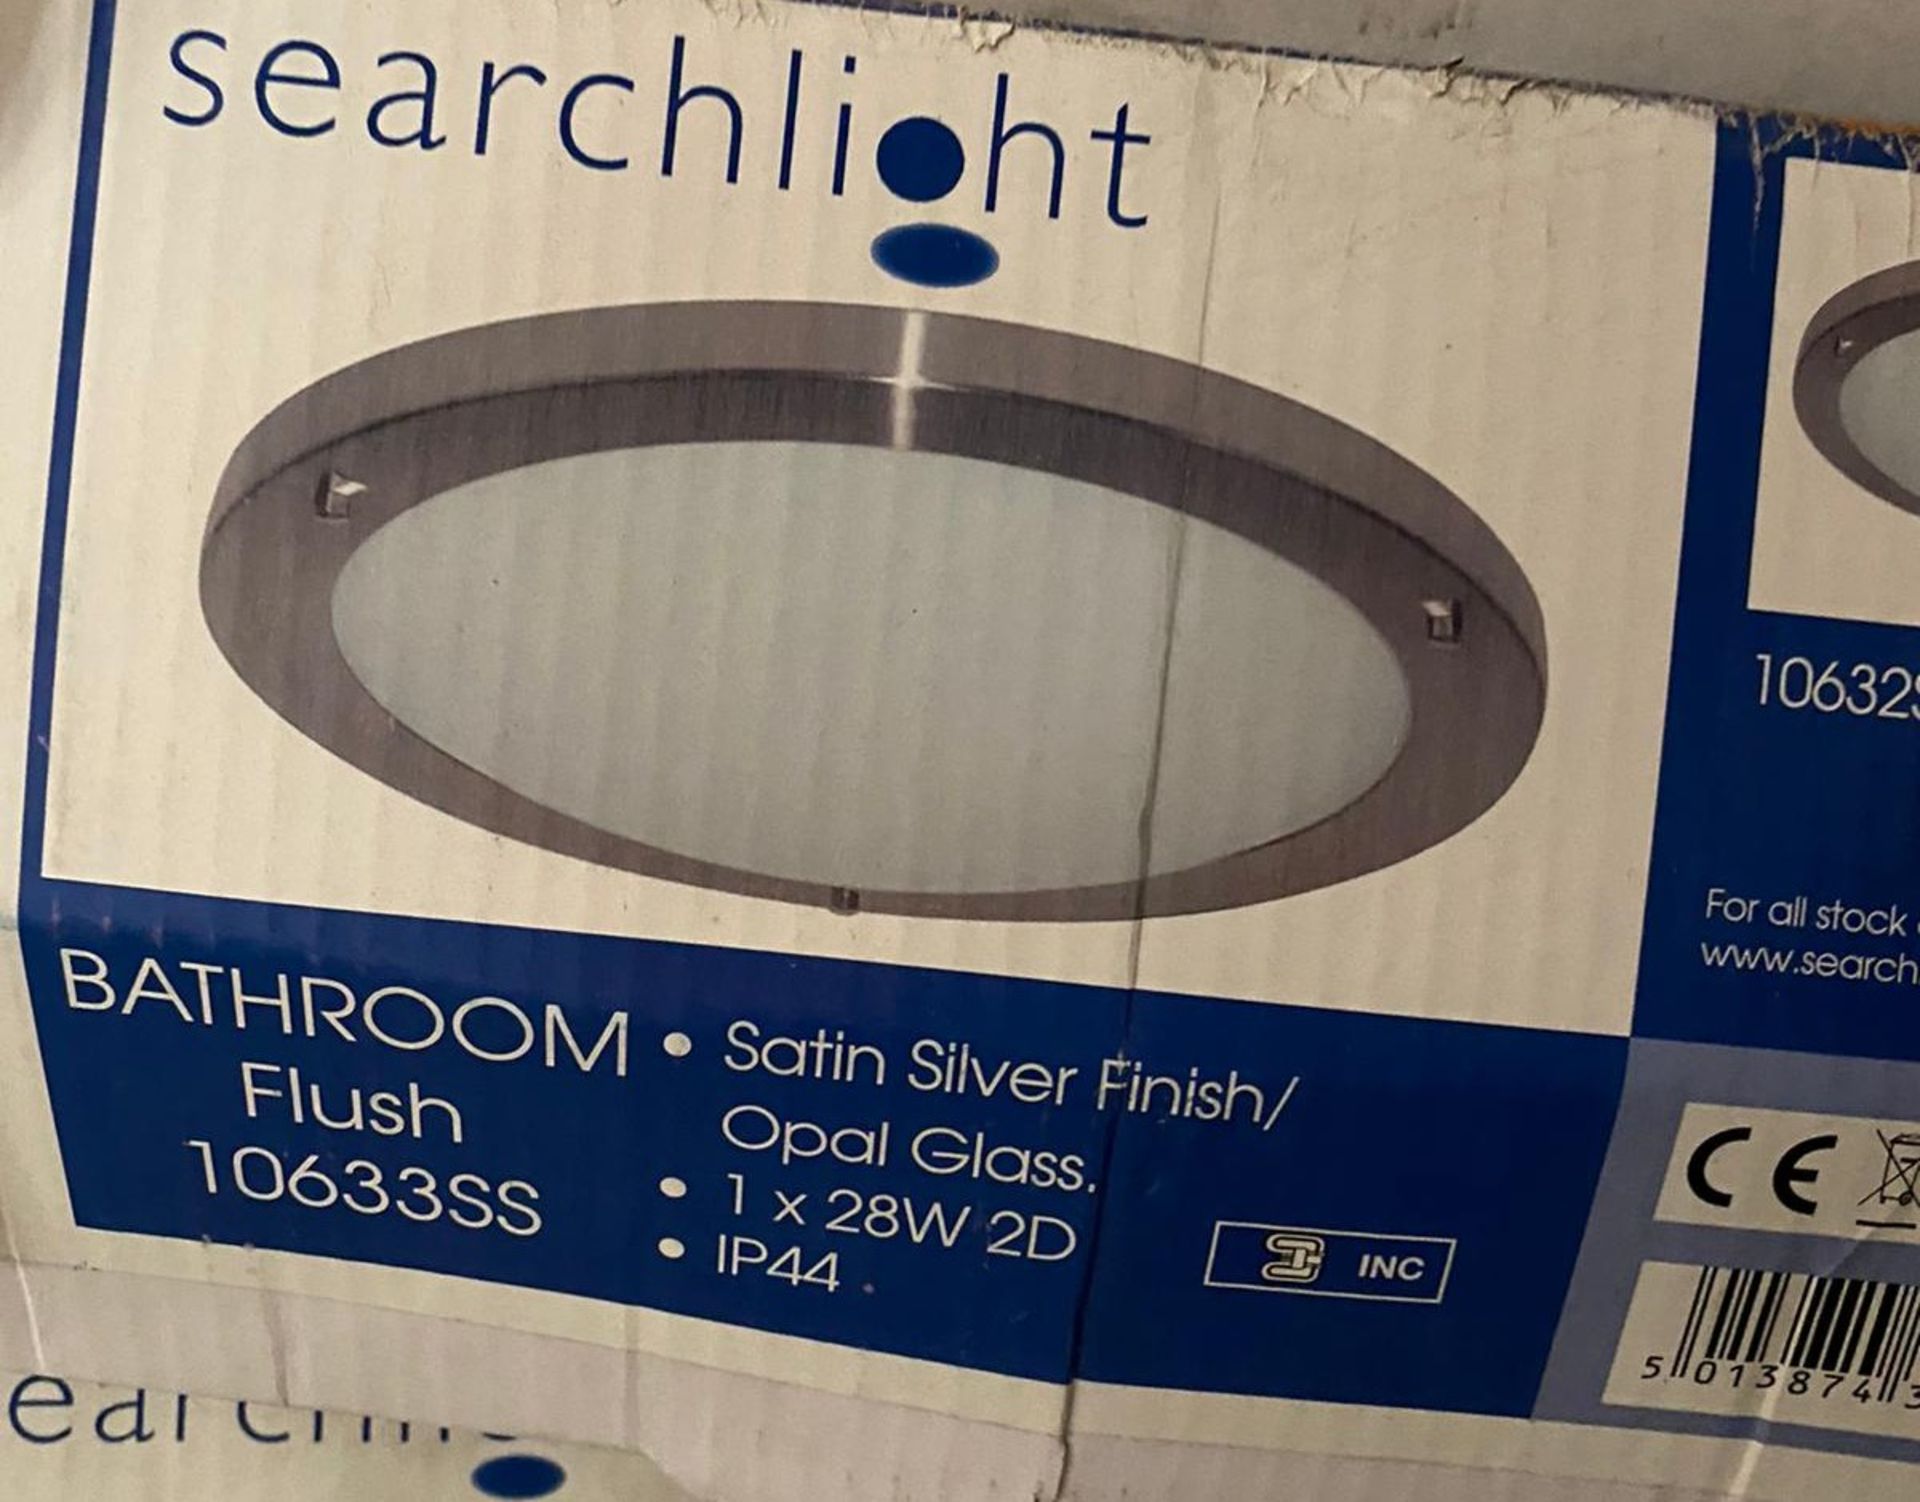 1 x Searchlight Bathroom Flush in a satin silver finish - Ref: 10632SS - New and Boxed - RRP: £60.00 - Image 3 of 4